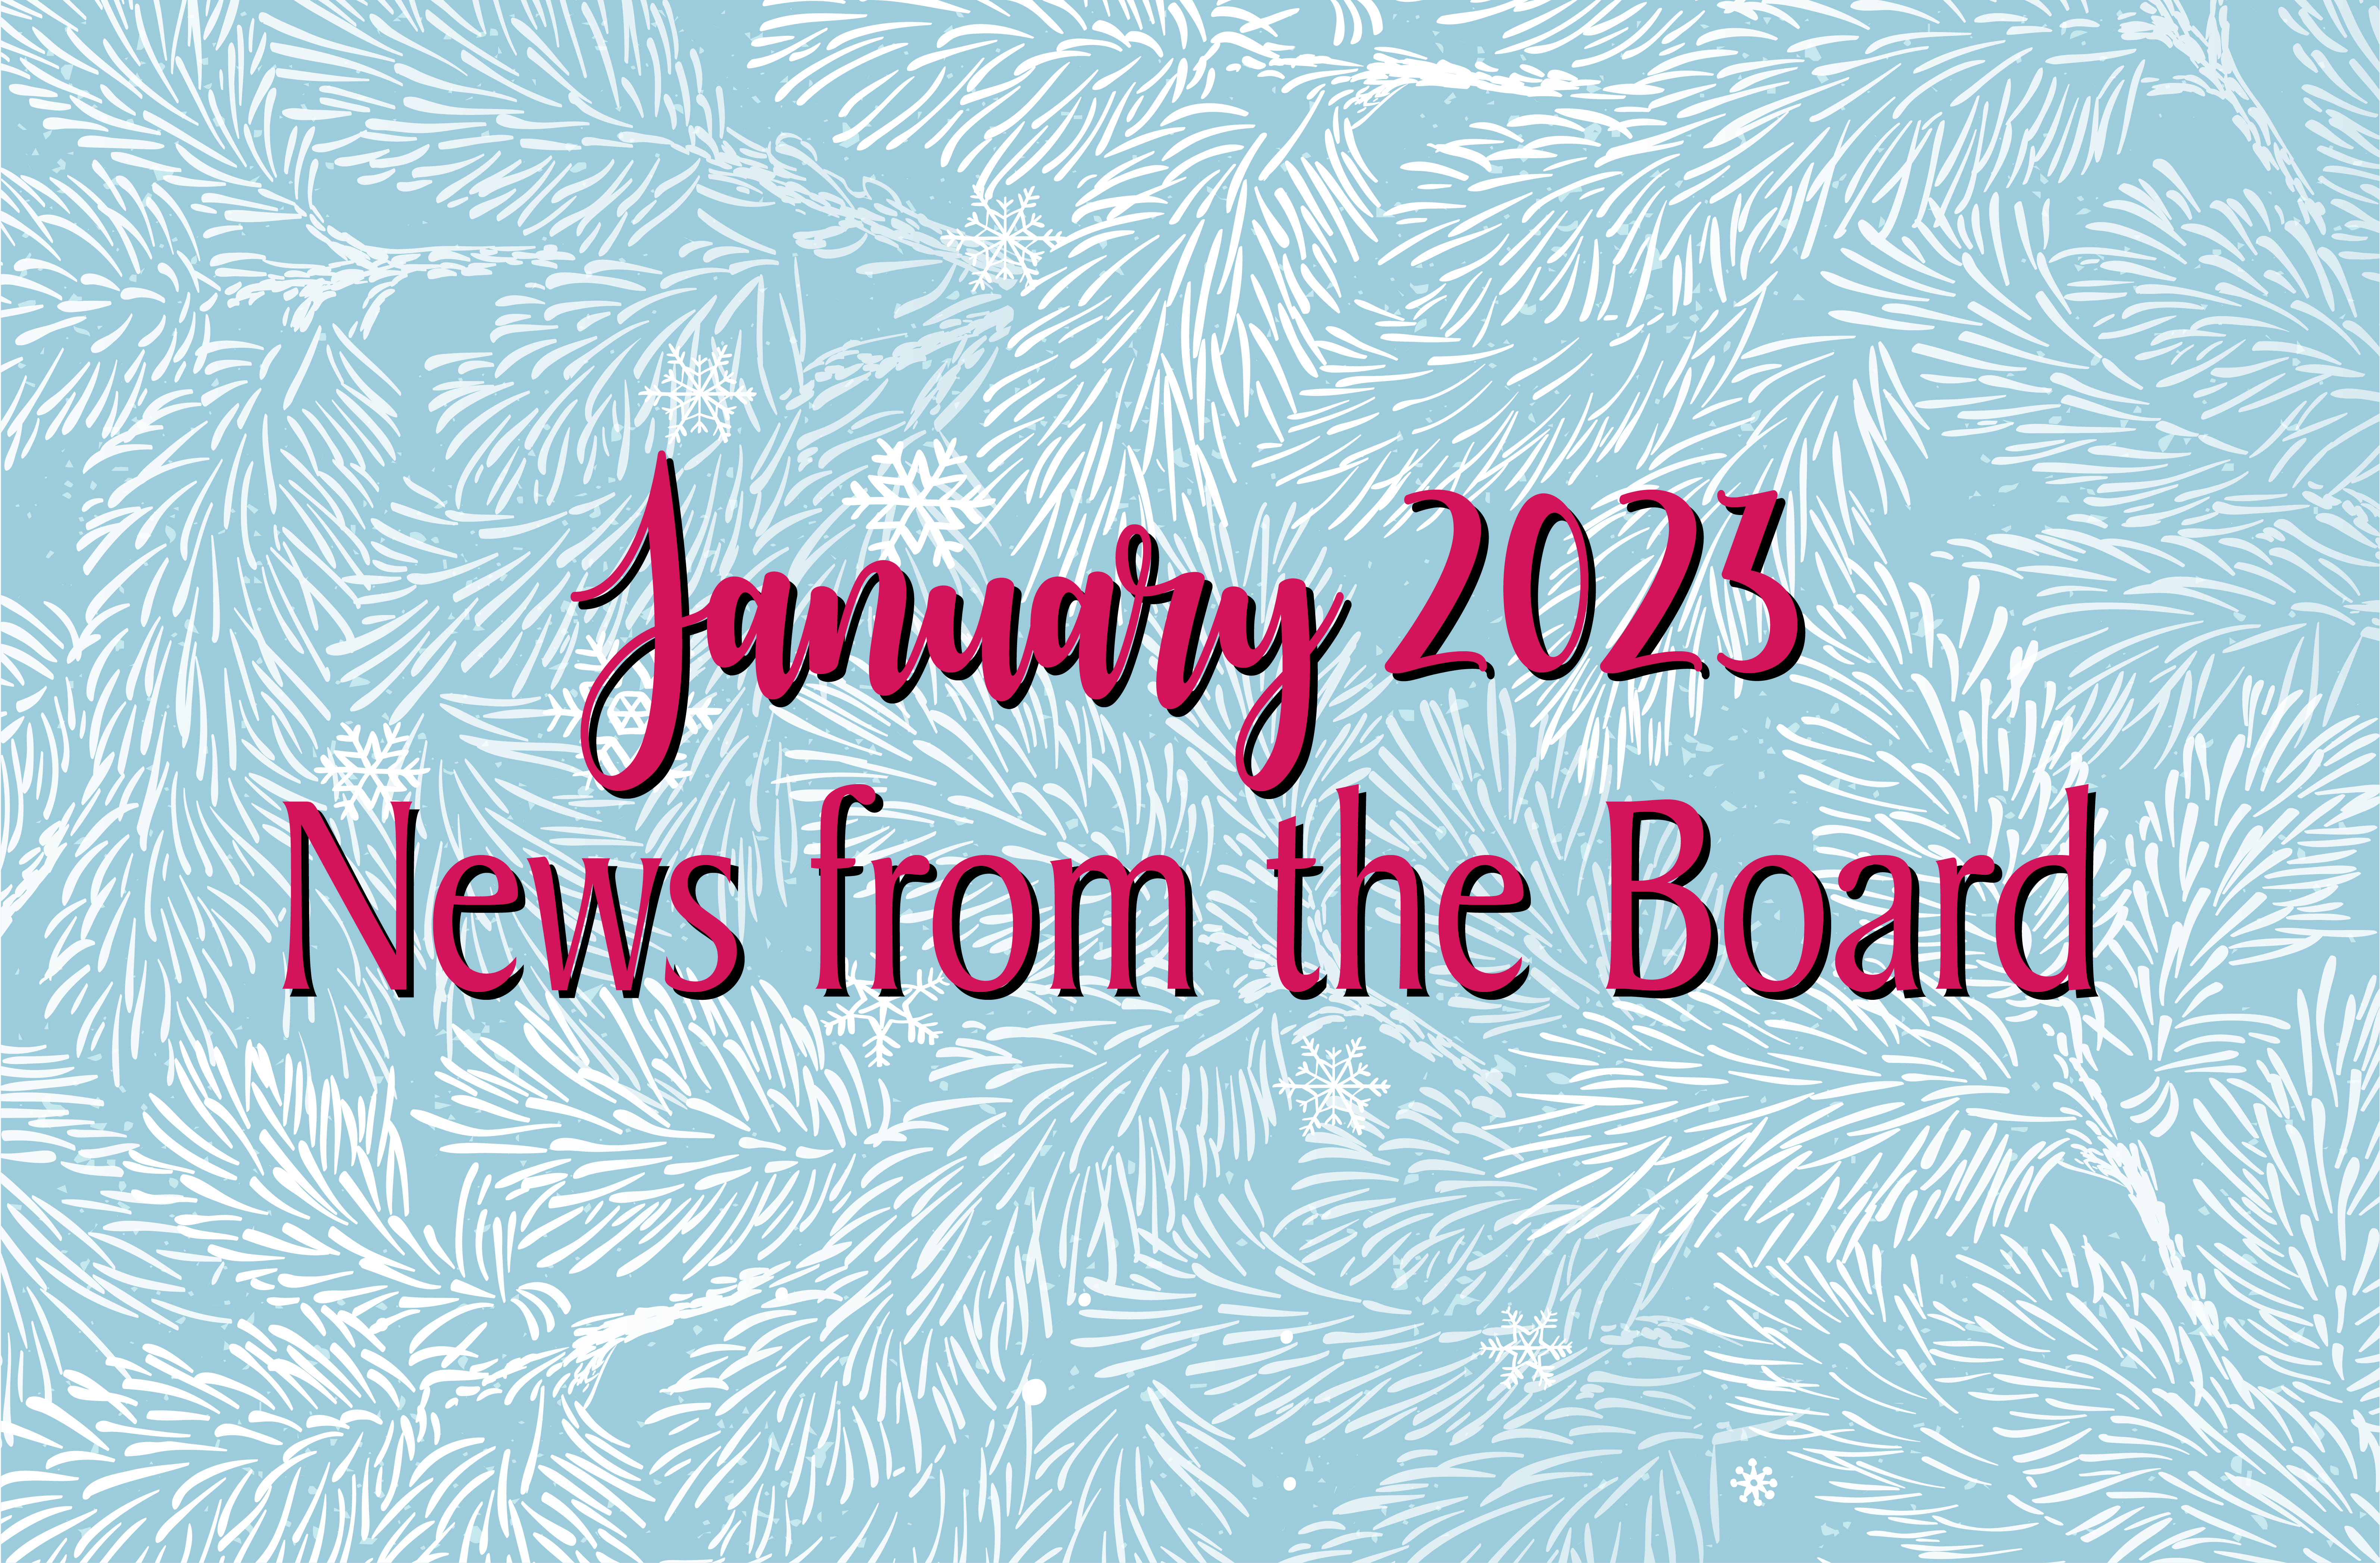 Yorktown Colony News from the Board - January 2023